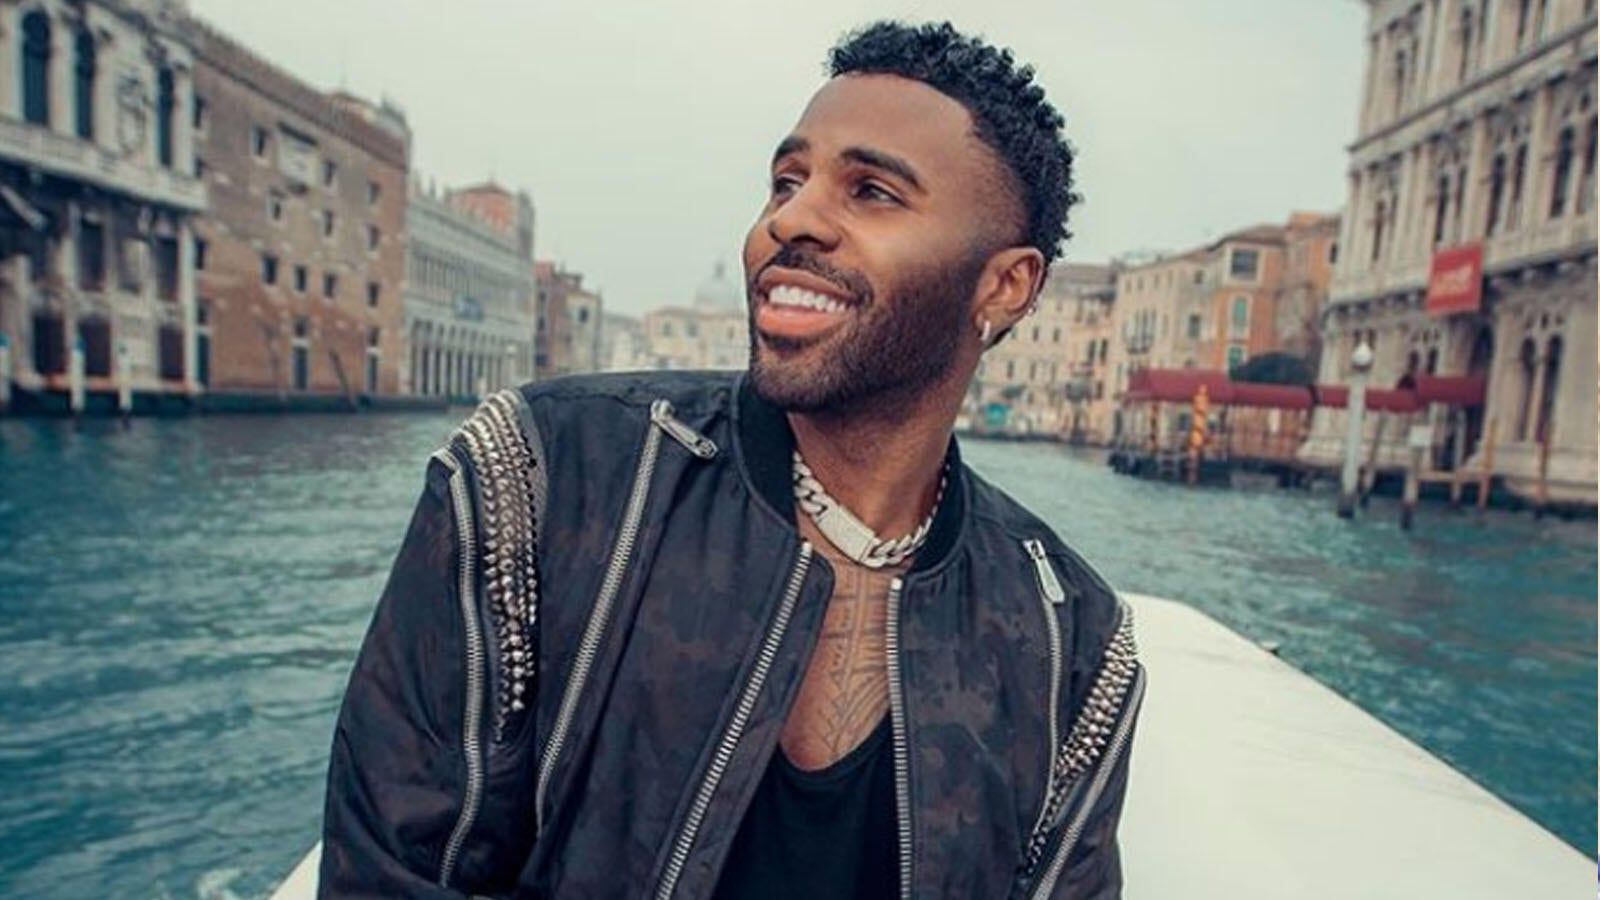 Jason Derulo Loses a Bet and Shaves His Eyebrow!